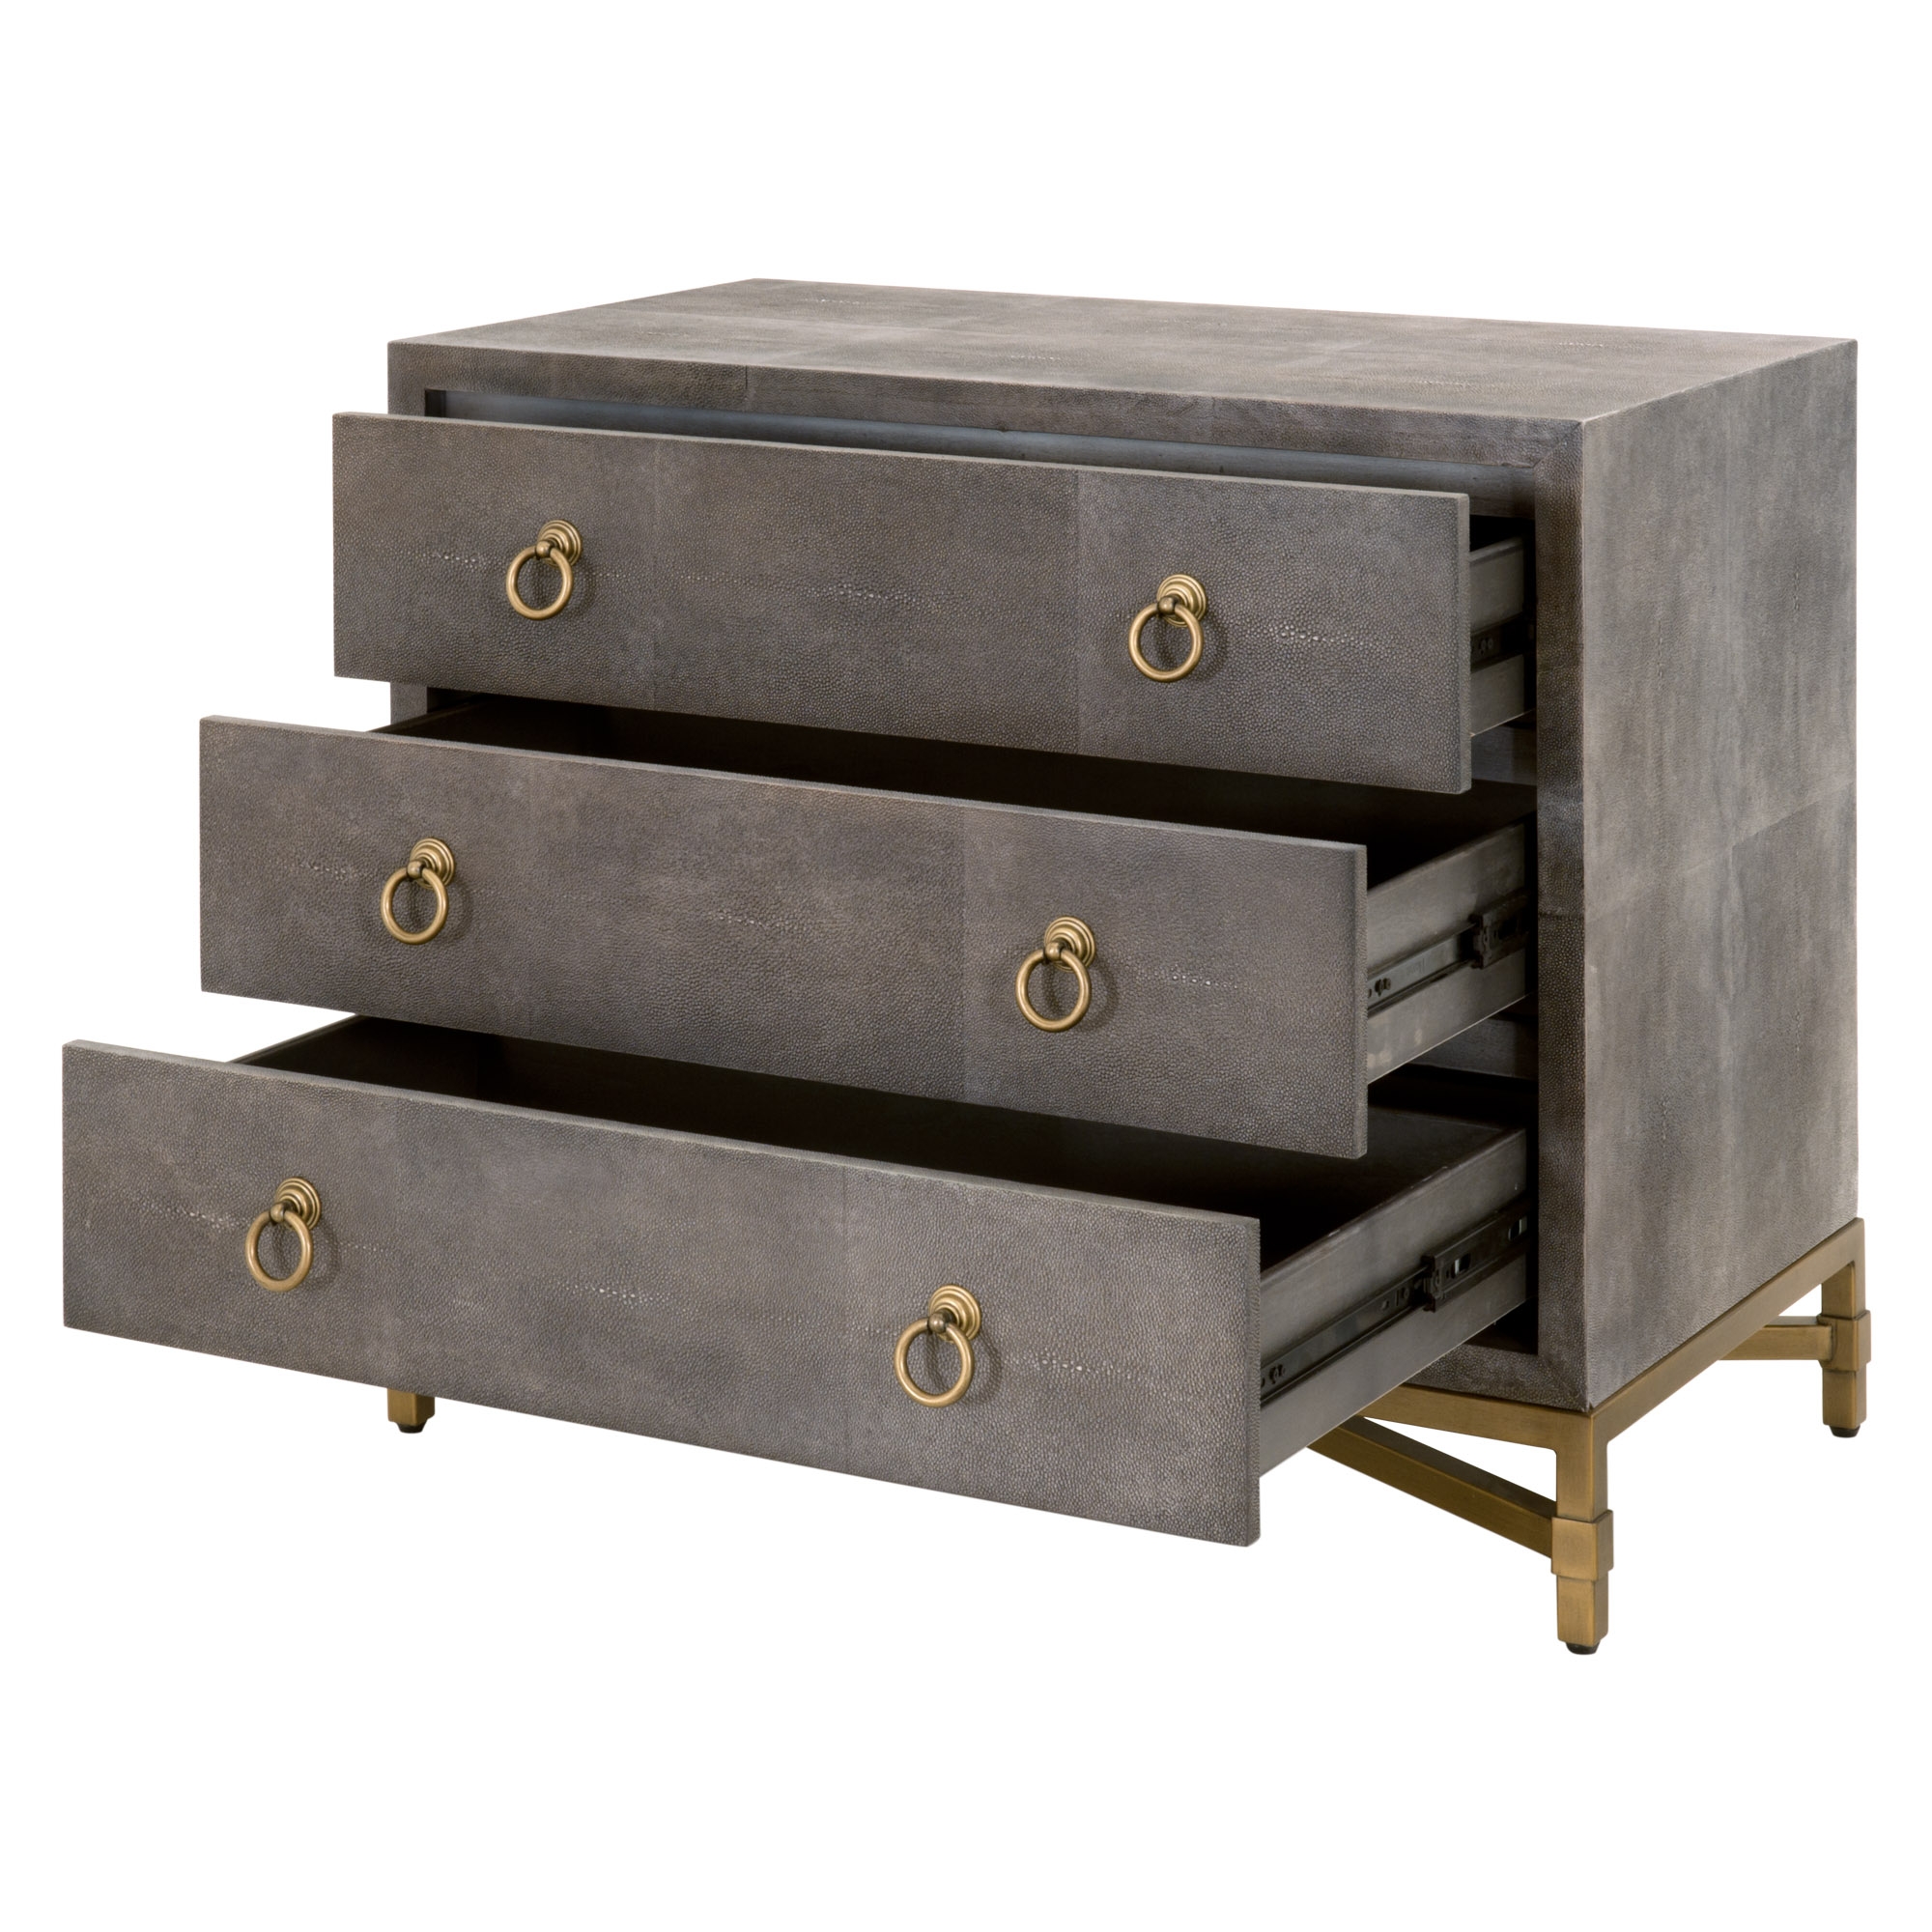 Colette Shagreen 3-Drawer Nightstand, Gray & Gold - Image 3